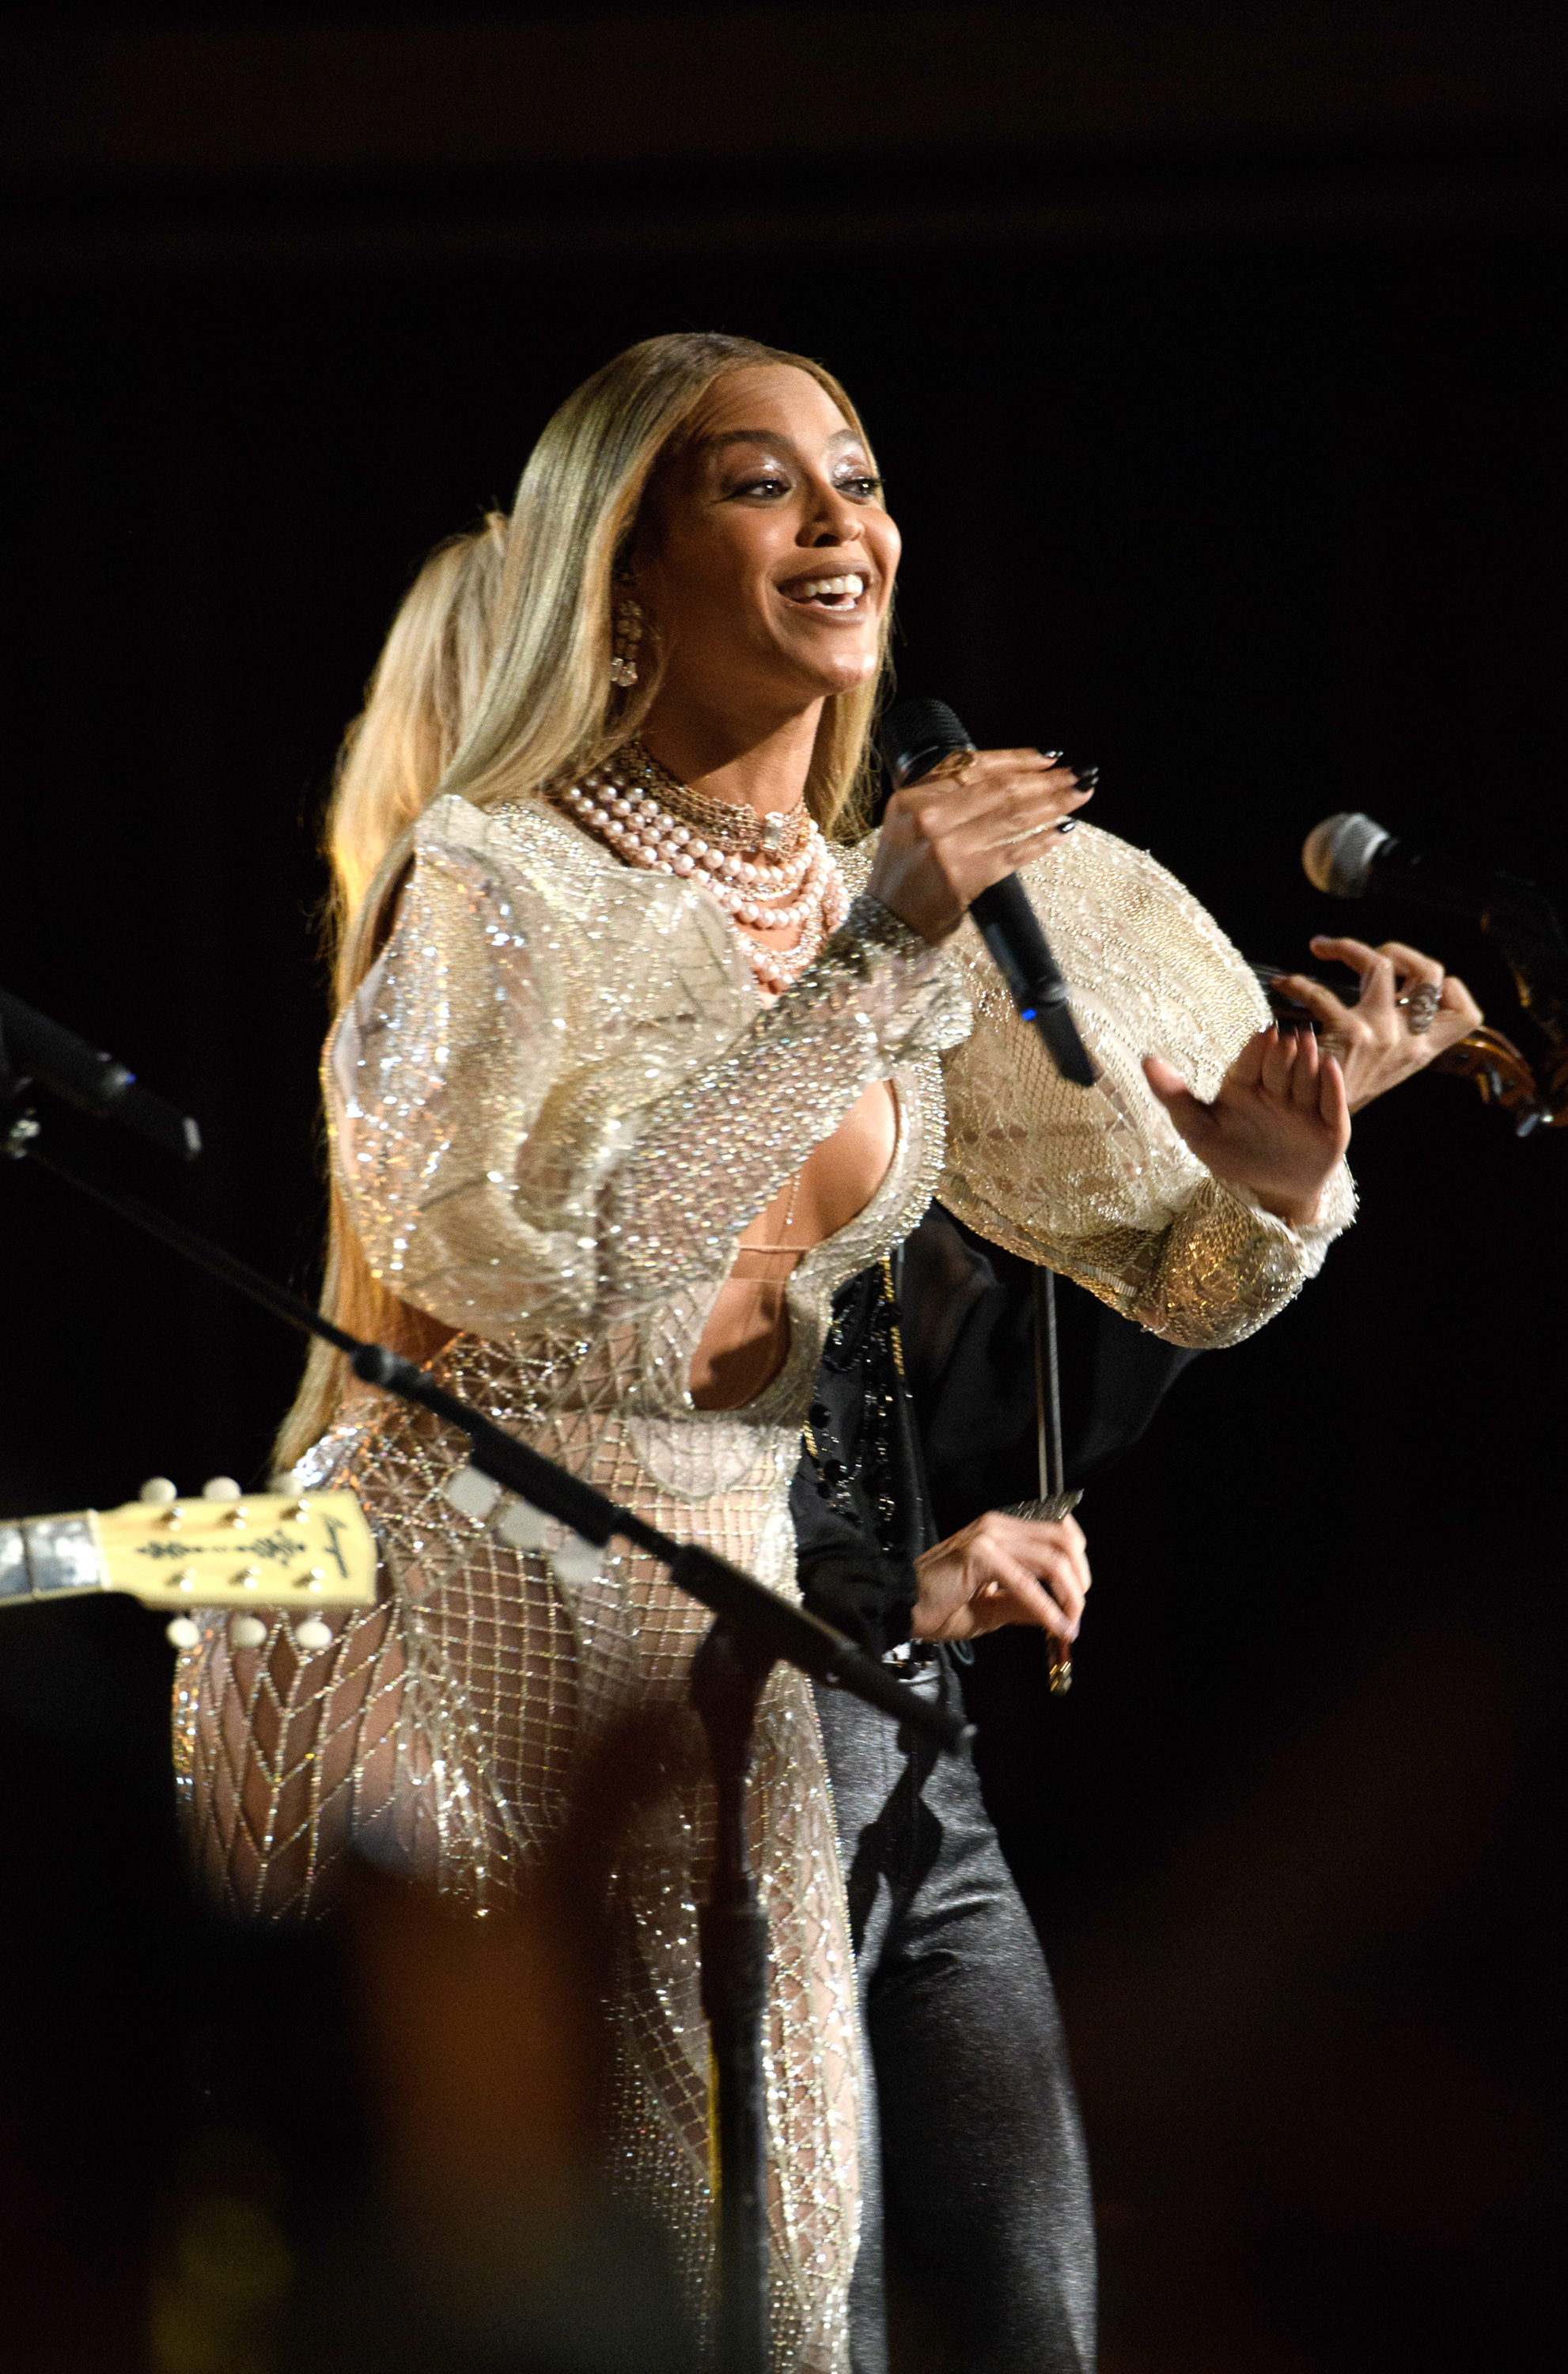 Beyoncé singing on stage, wearing a beaded dress